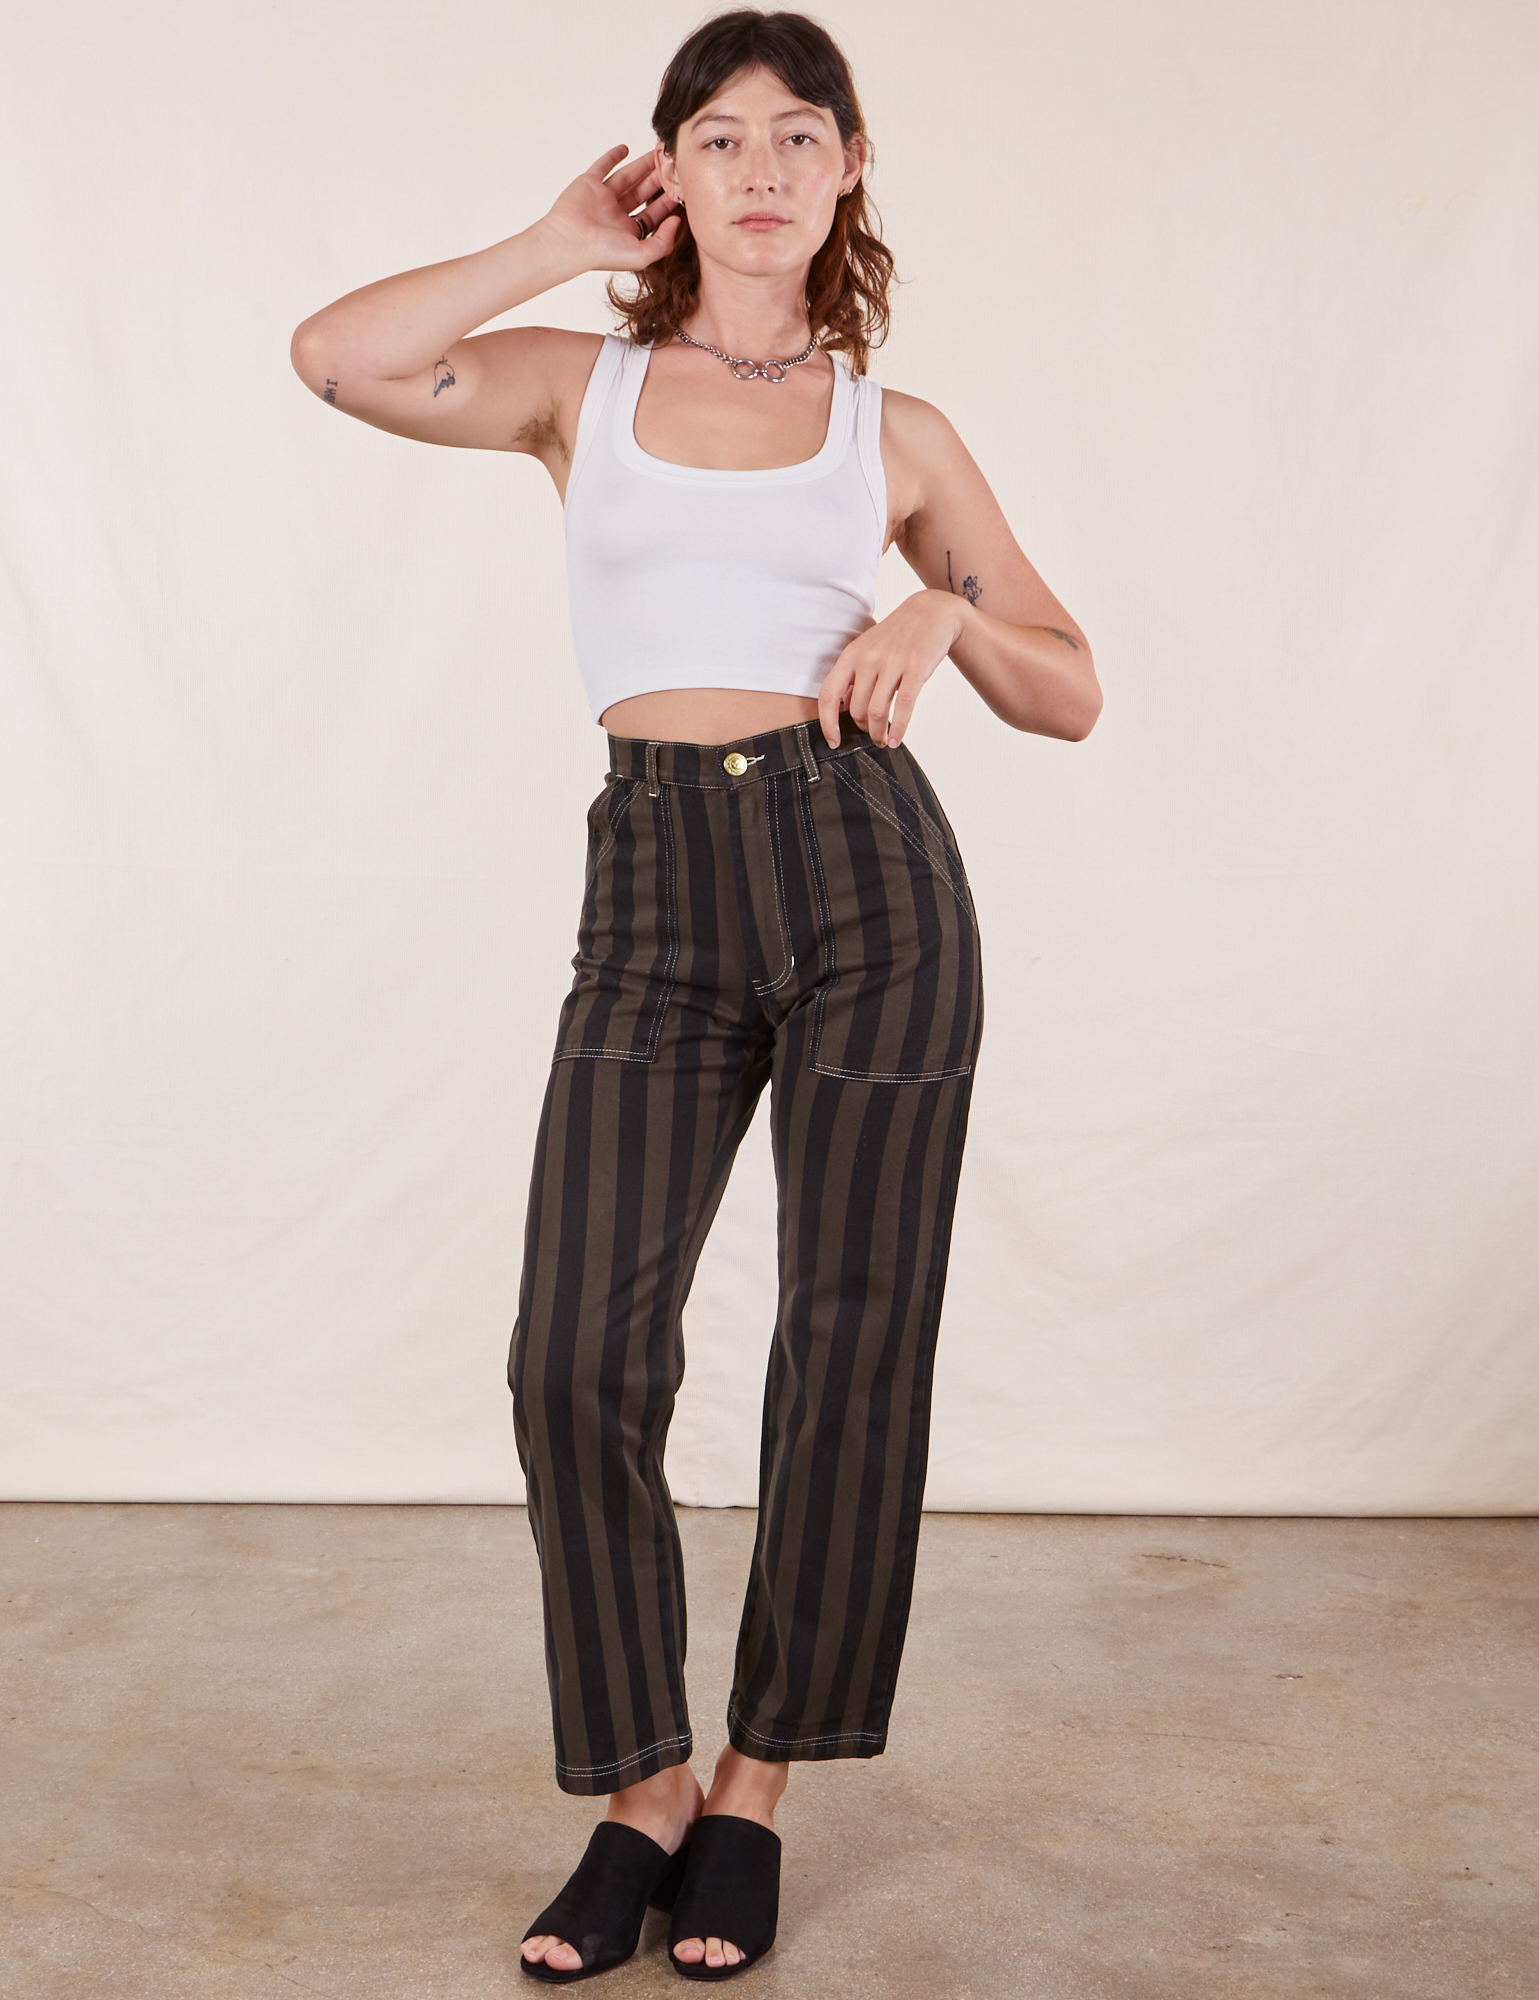 Alex is 5&#39;8&quot; and wearing XS Black Striped Work Pants in Espresso paired with vintage off-white Tank Top